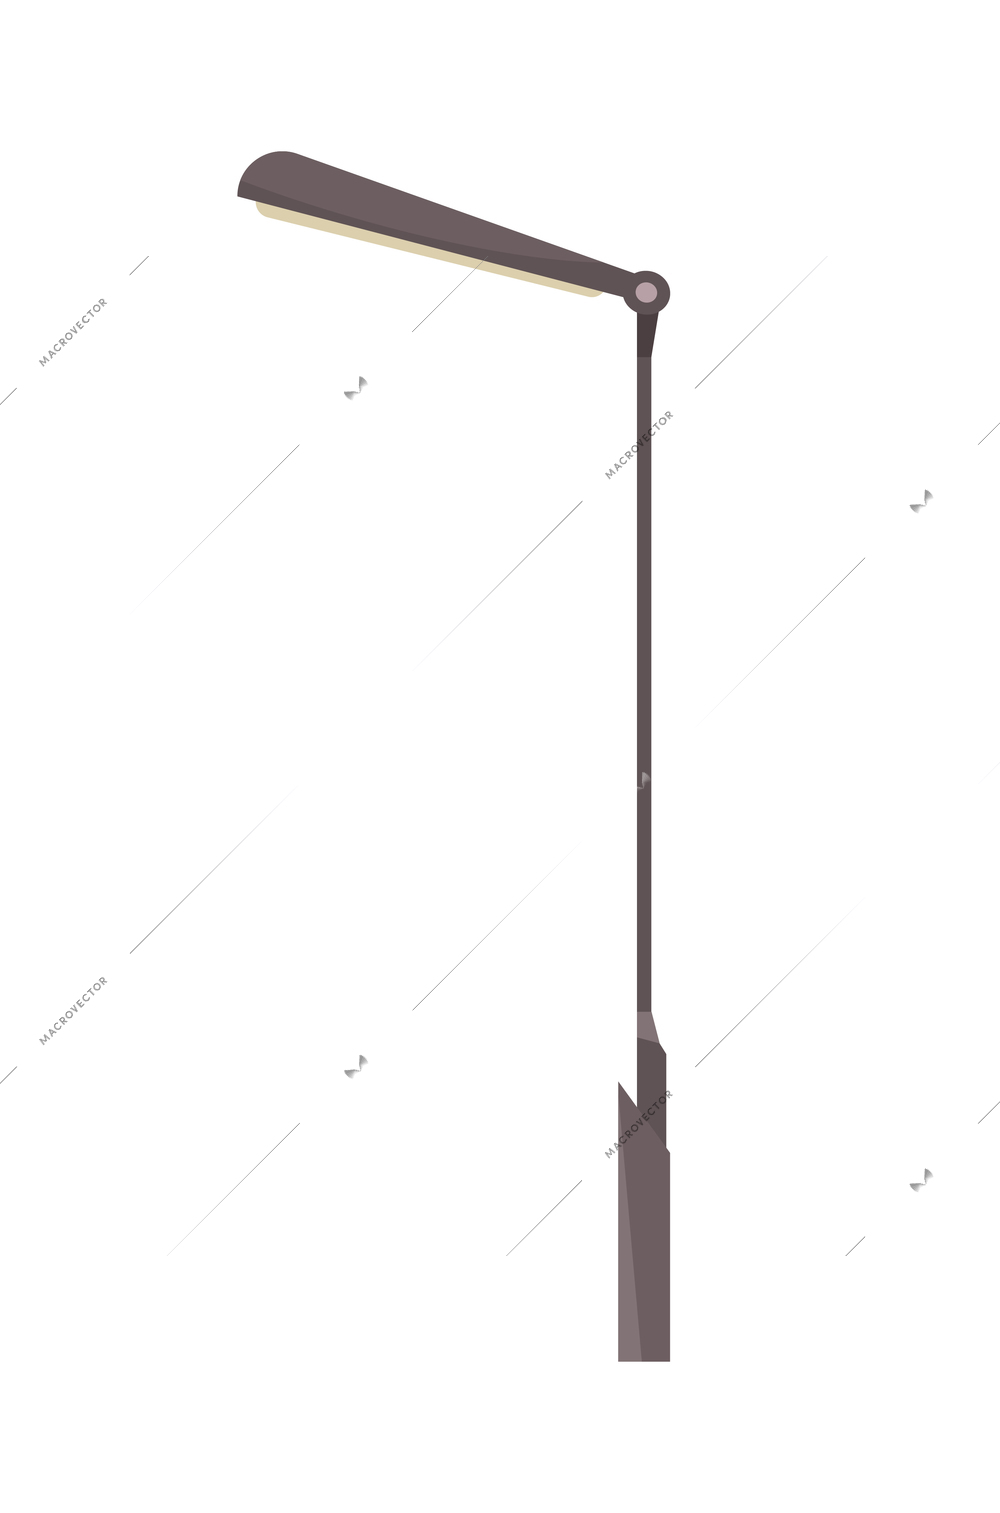 Lamppost icon in flat style on white background vector illustration